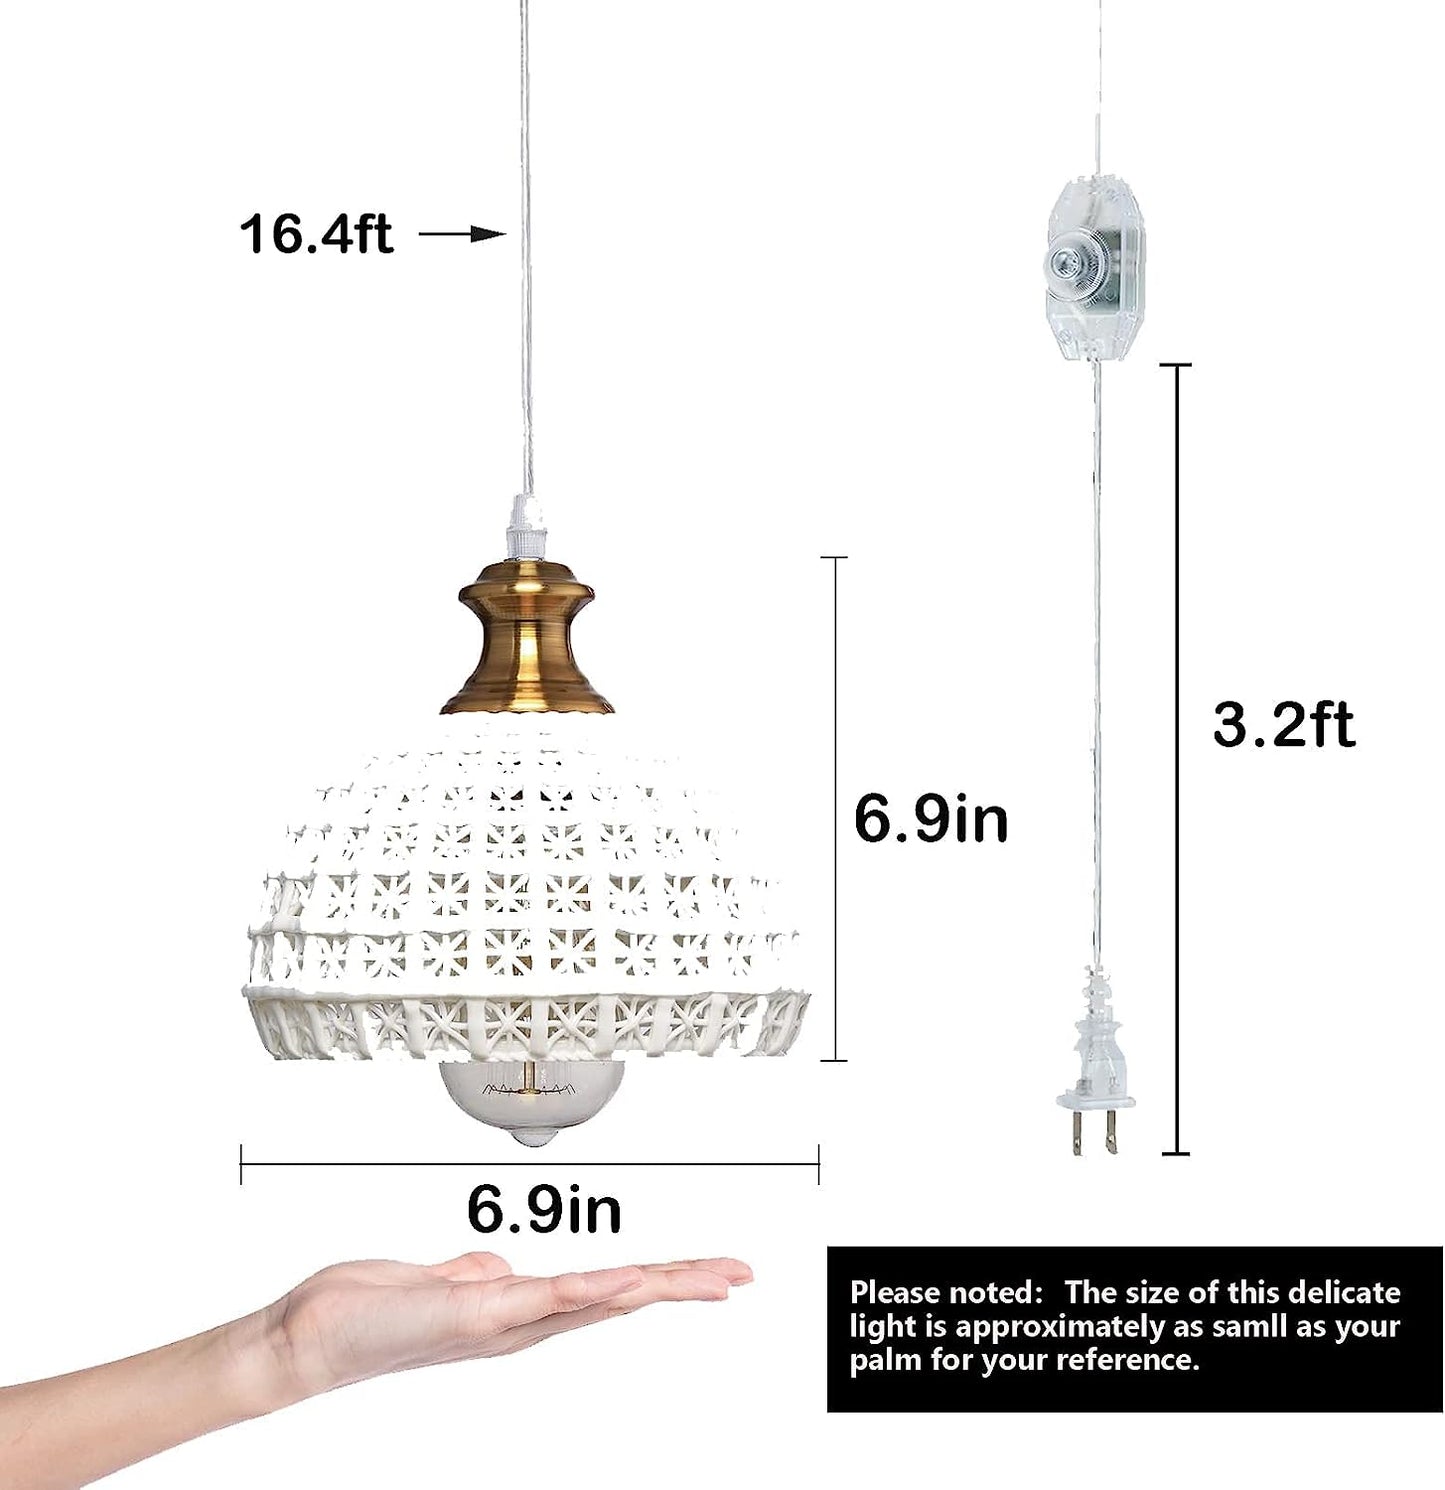 HMVPL Pendant Lights Kitchen Island,Plug in Pendant Light Fixtures with Cord,Small Hanging Plug in Light with Dimmable Switch&Ceramic Shade,White Plug Chandelier for Dining Room Hallway Foyer Bedroom